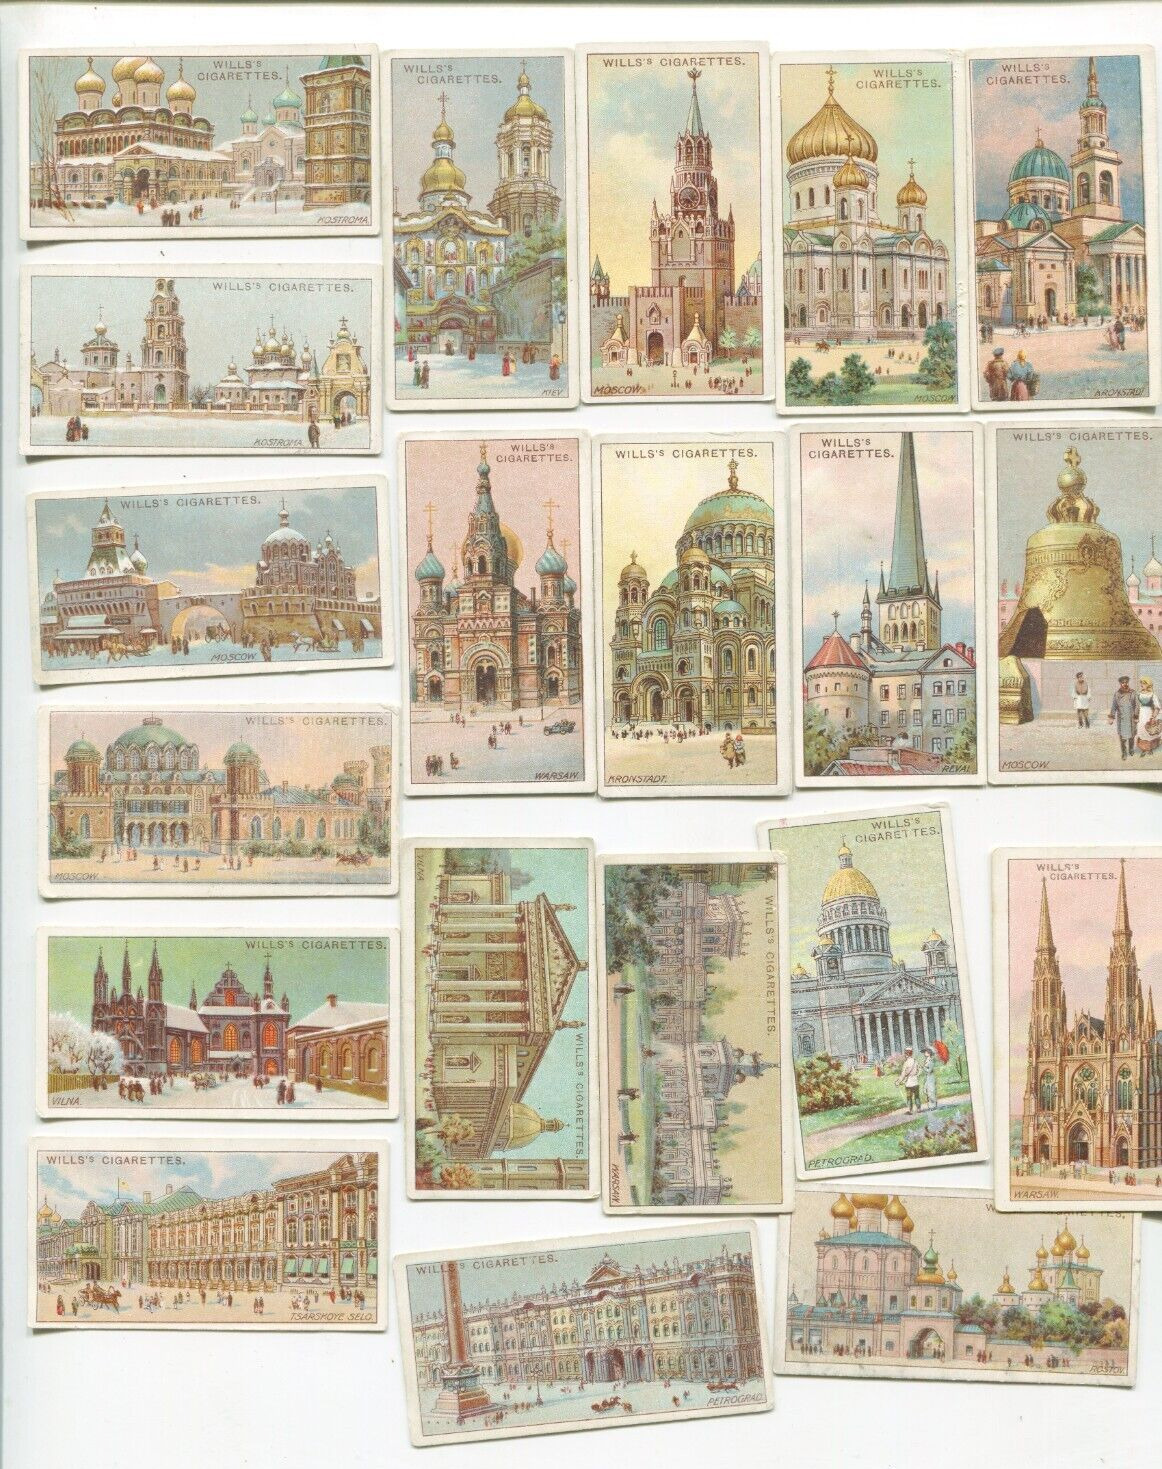 1916 WILLS CIGARETTES GEMS OF RUSSIAN ARCHITECTURE 20 CARD TOBACCO LOT